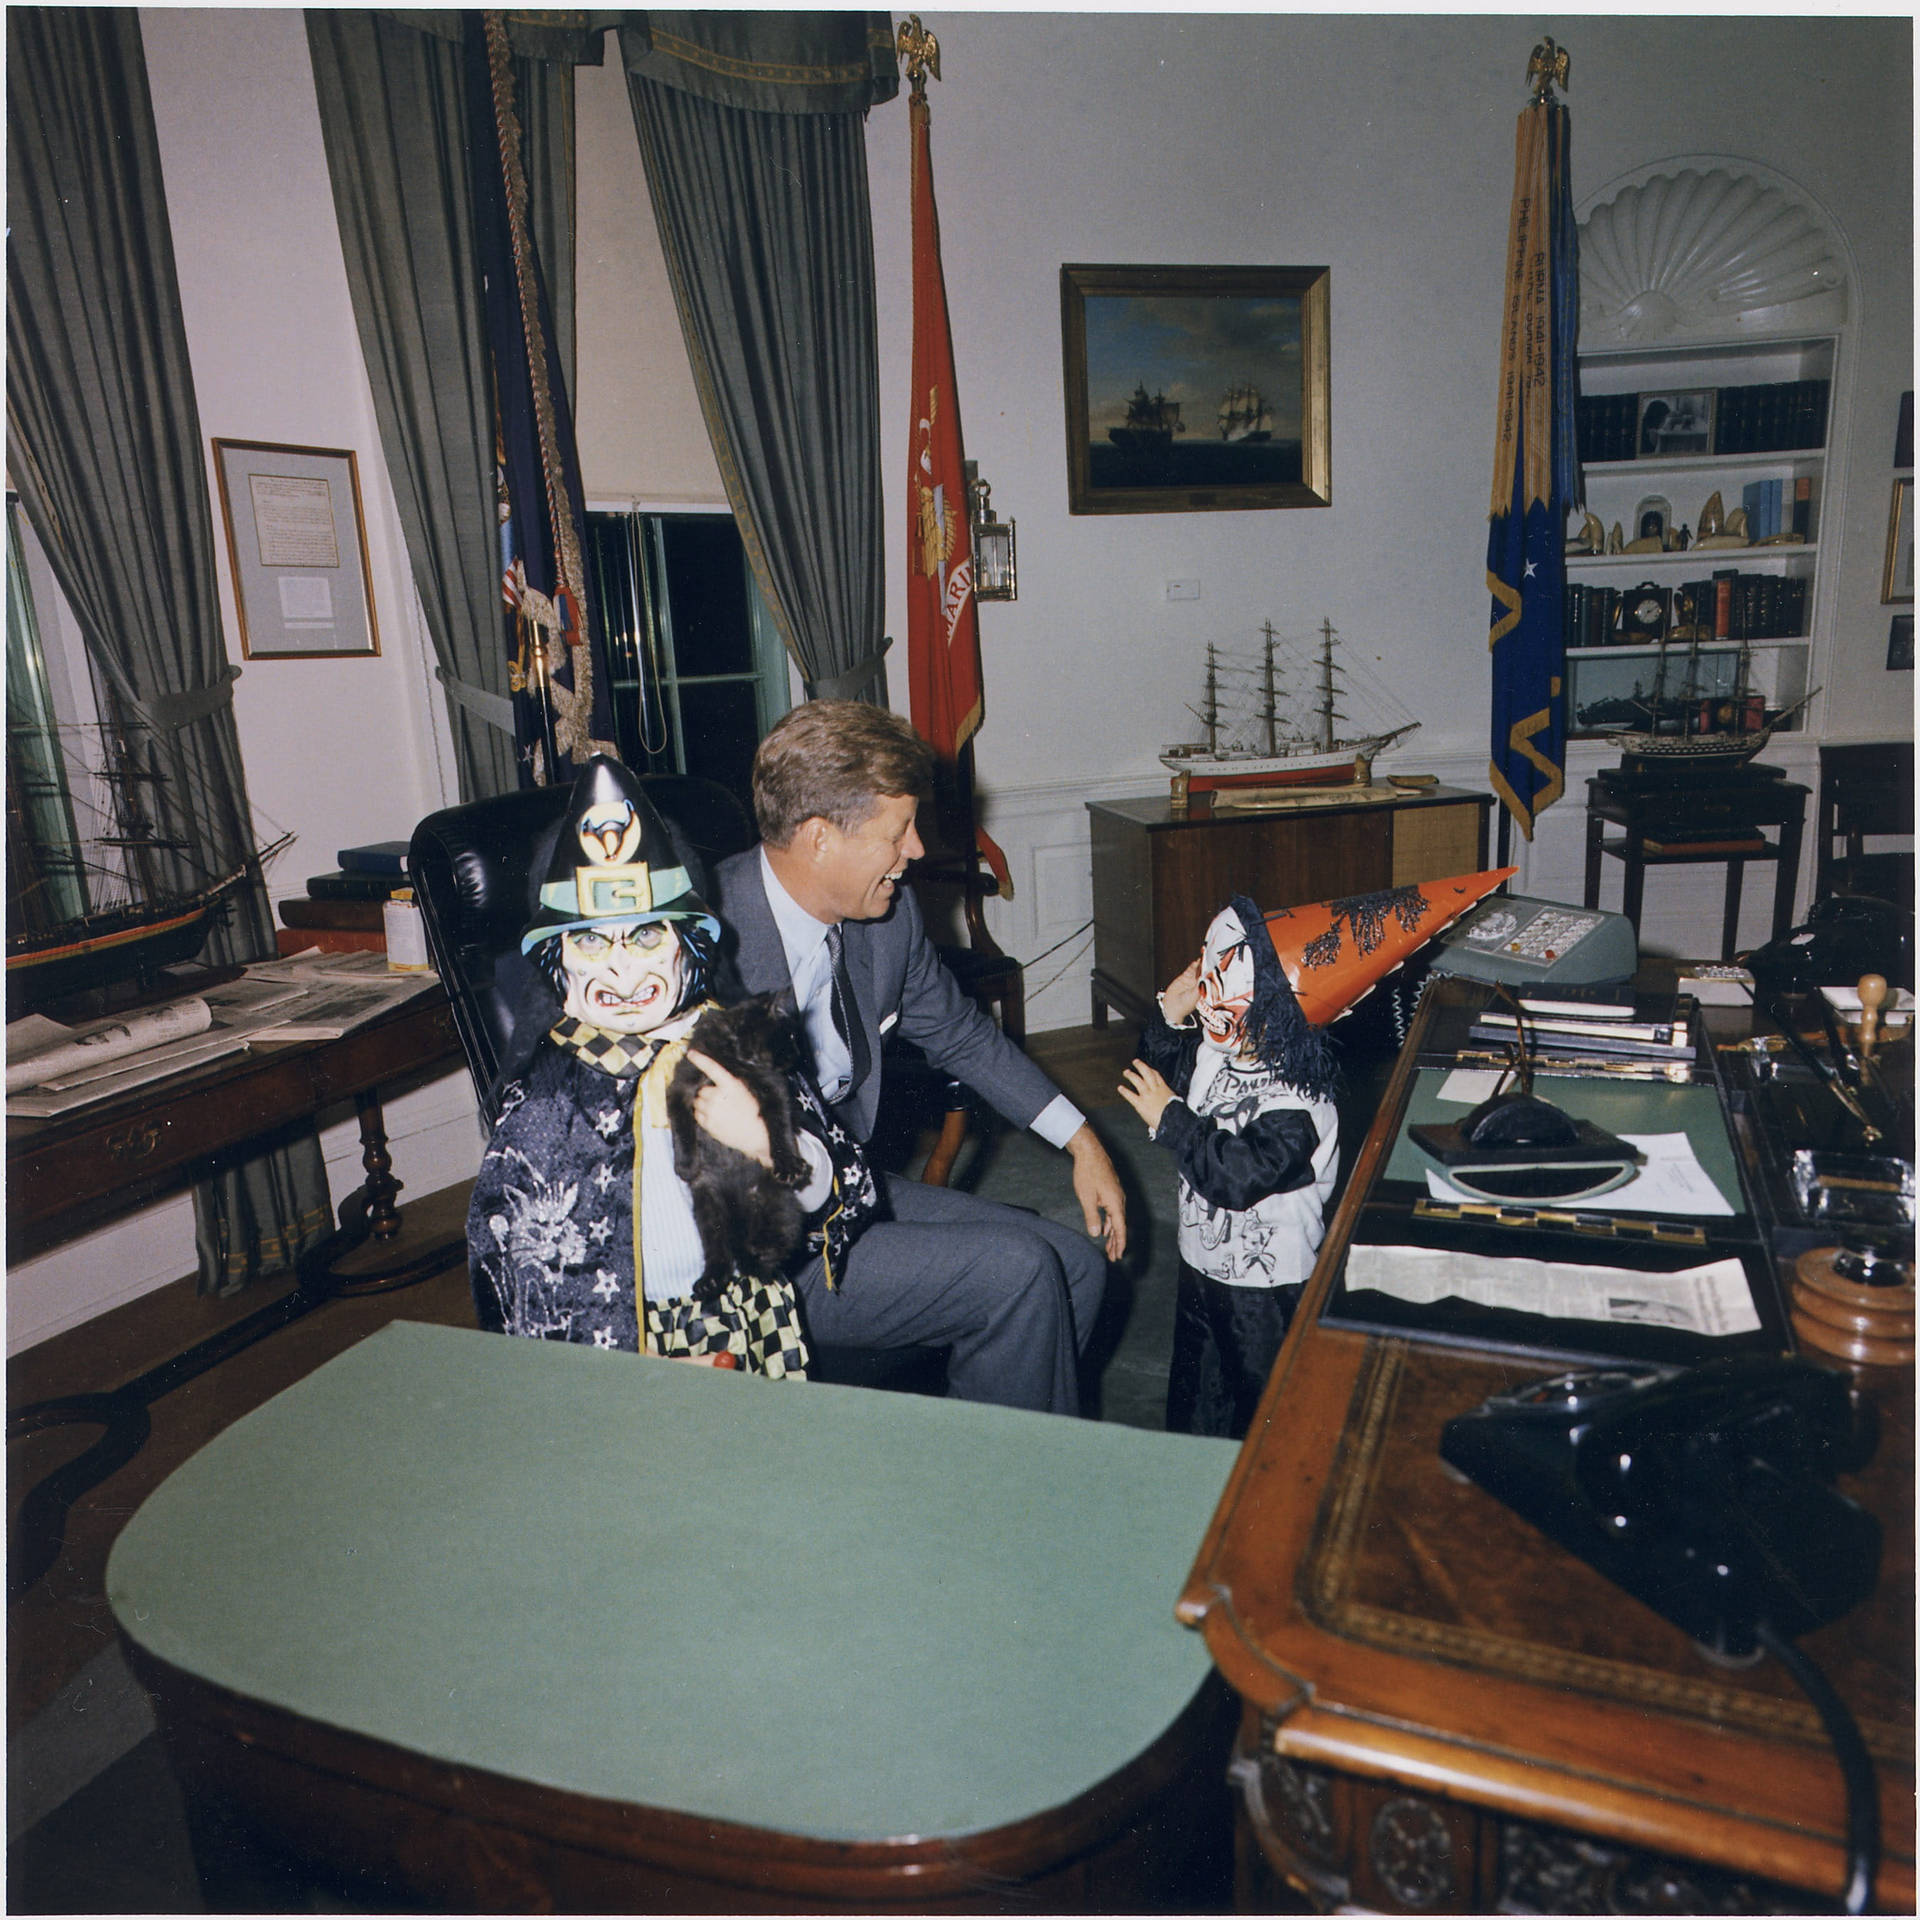 Halloween Party With John F. Kennedy Background